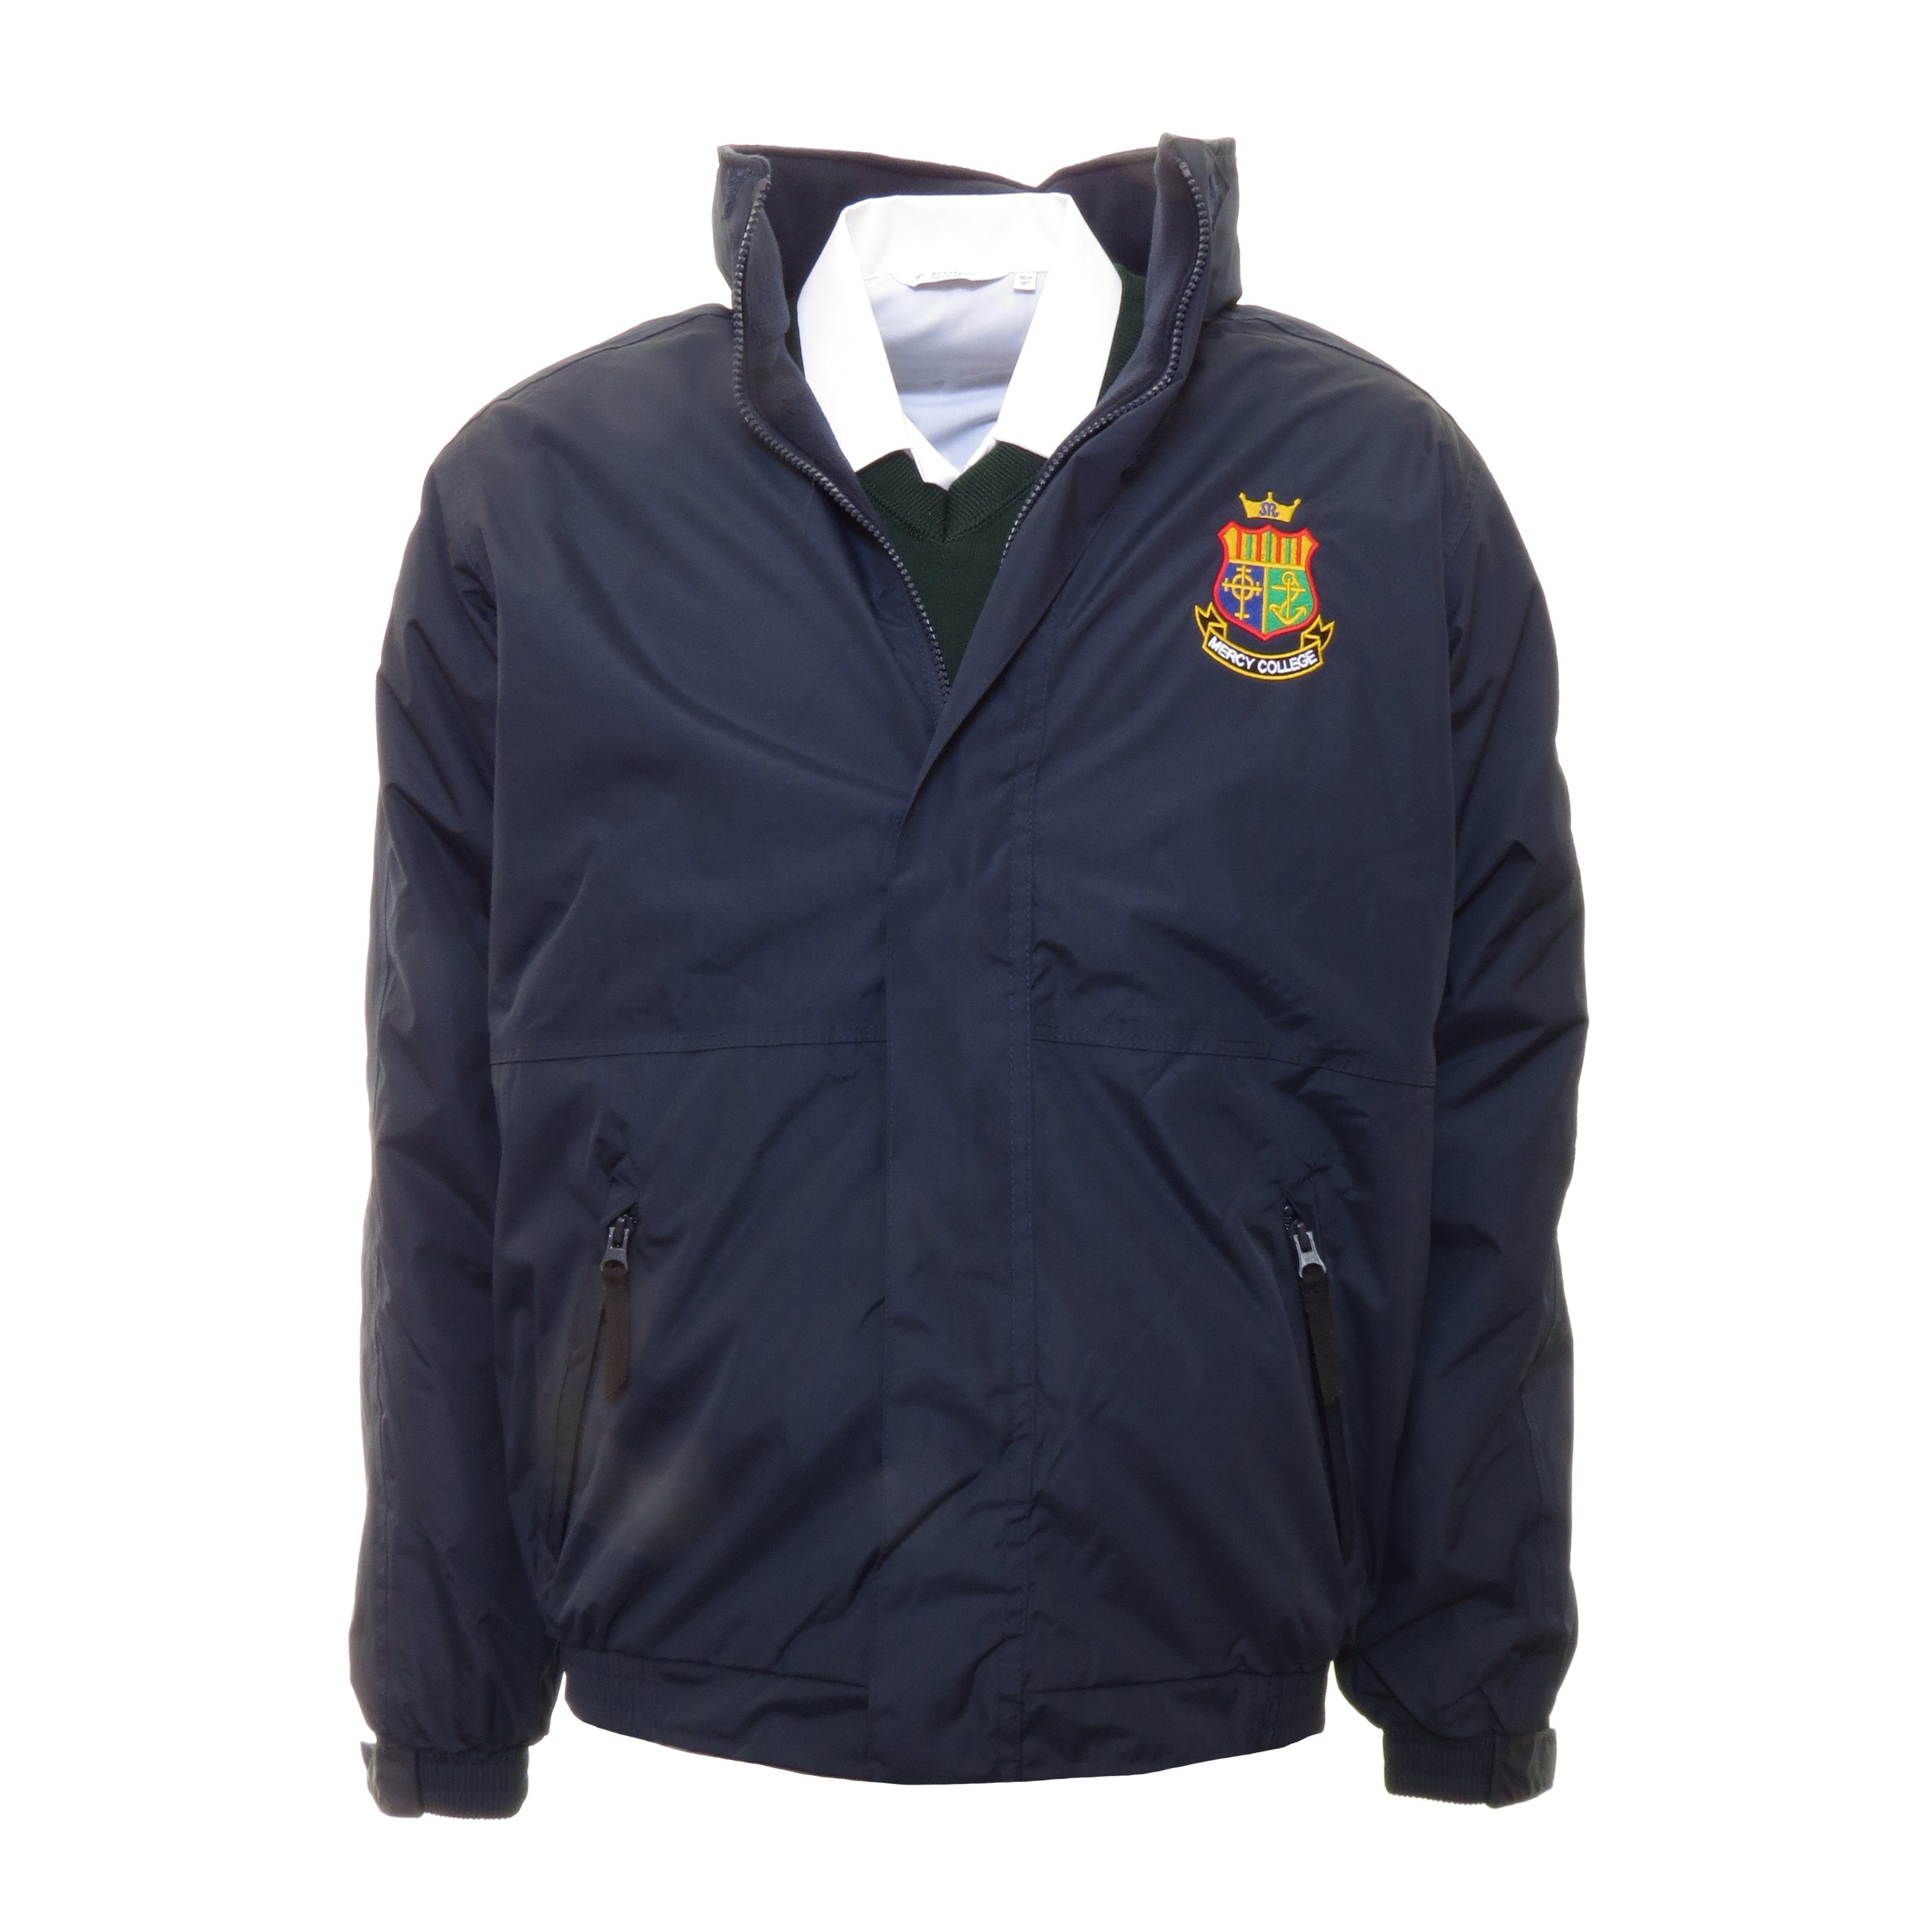 Mercy College Coolock Crested School Jacket